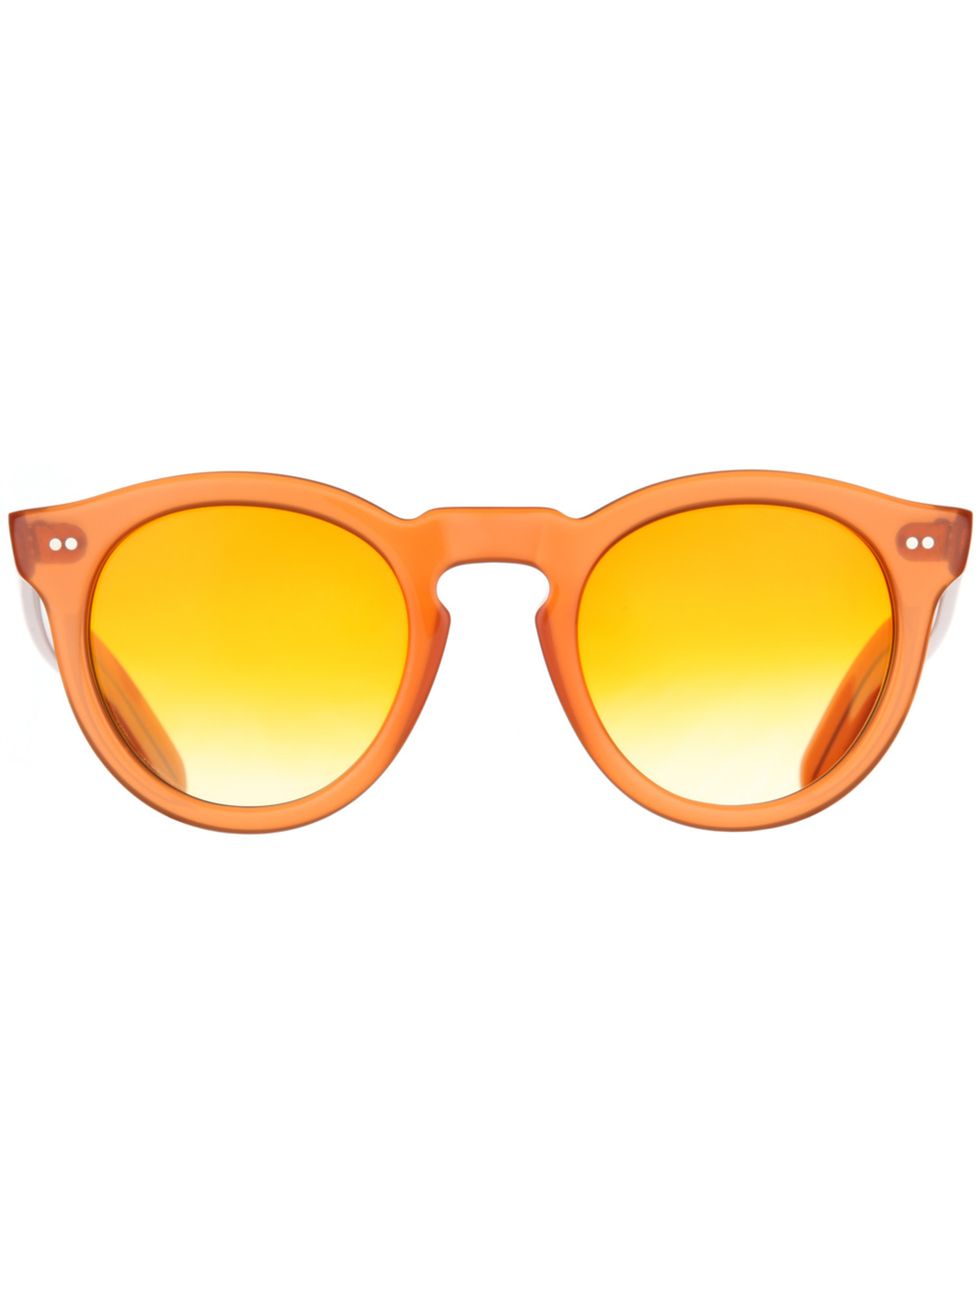 Eyewear, Vision care, Brown, Product, Yellow, Personal protective equipment, Orange, Line, Reflection, Amber, 